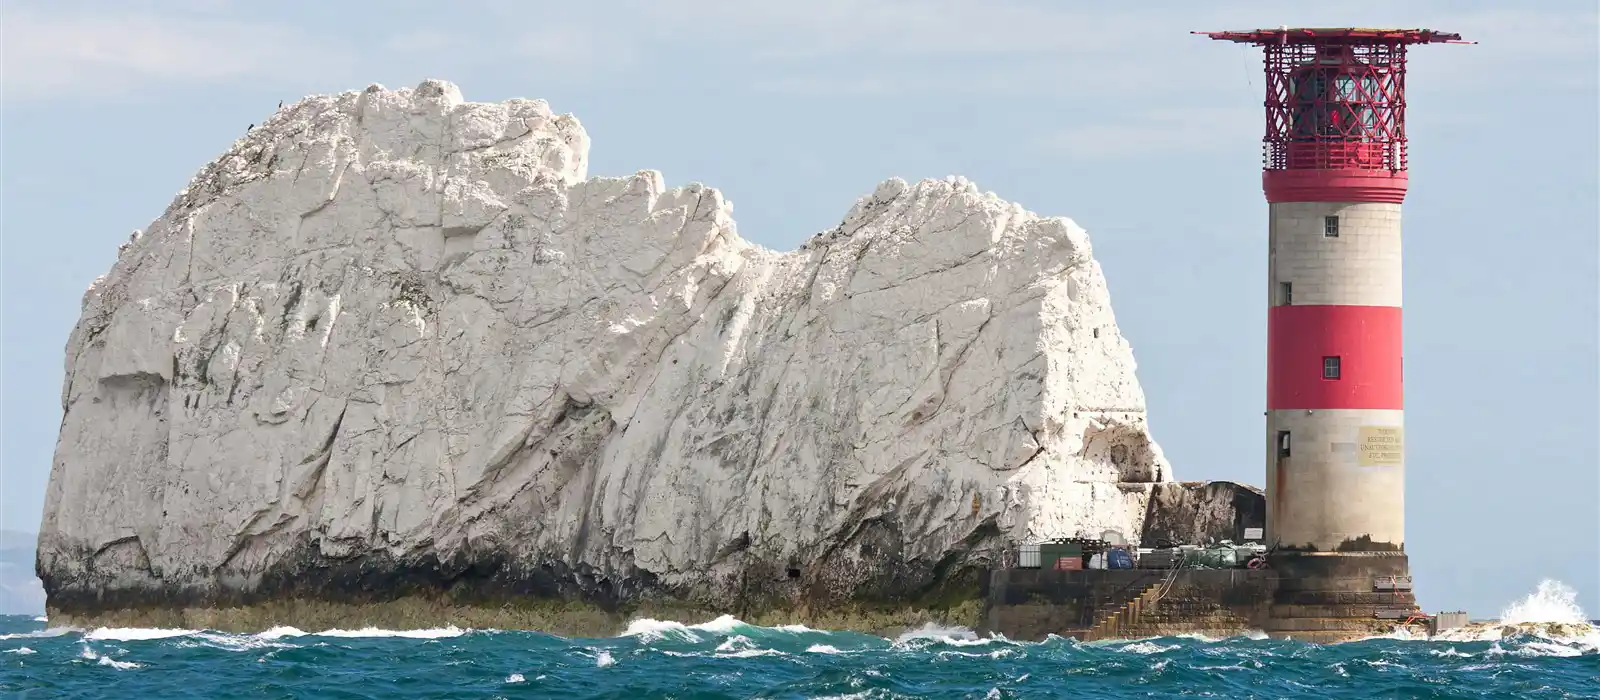 The Lighthouse at the end of the Needles on the Isle of Wight